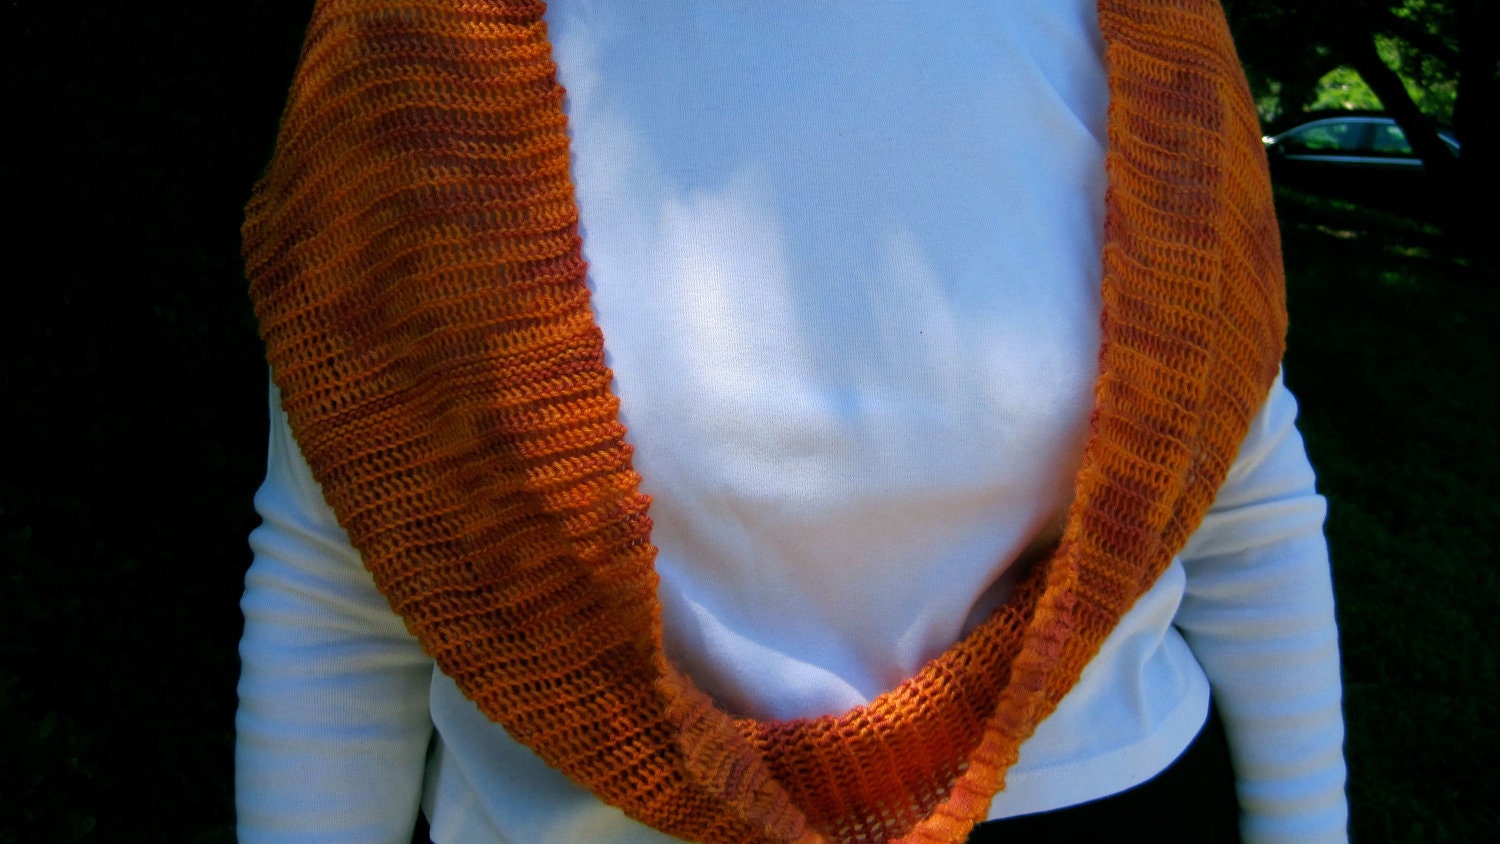 How to Find Free Knitting and Crocheted Cowls and Scarf Patterns